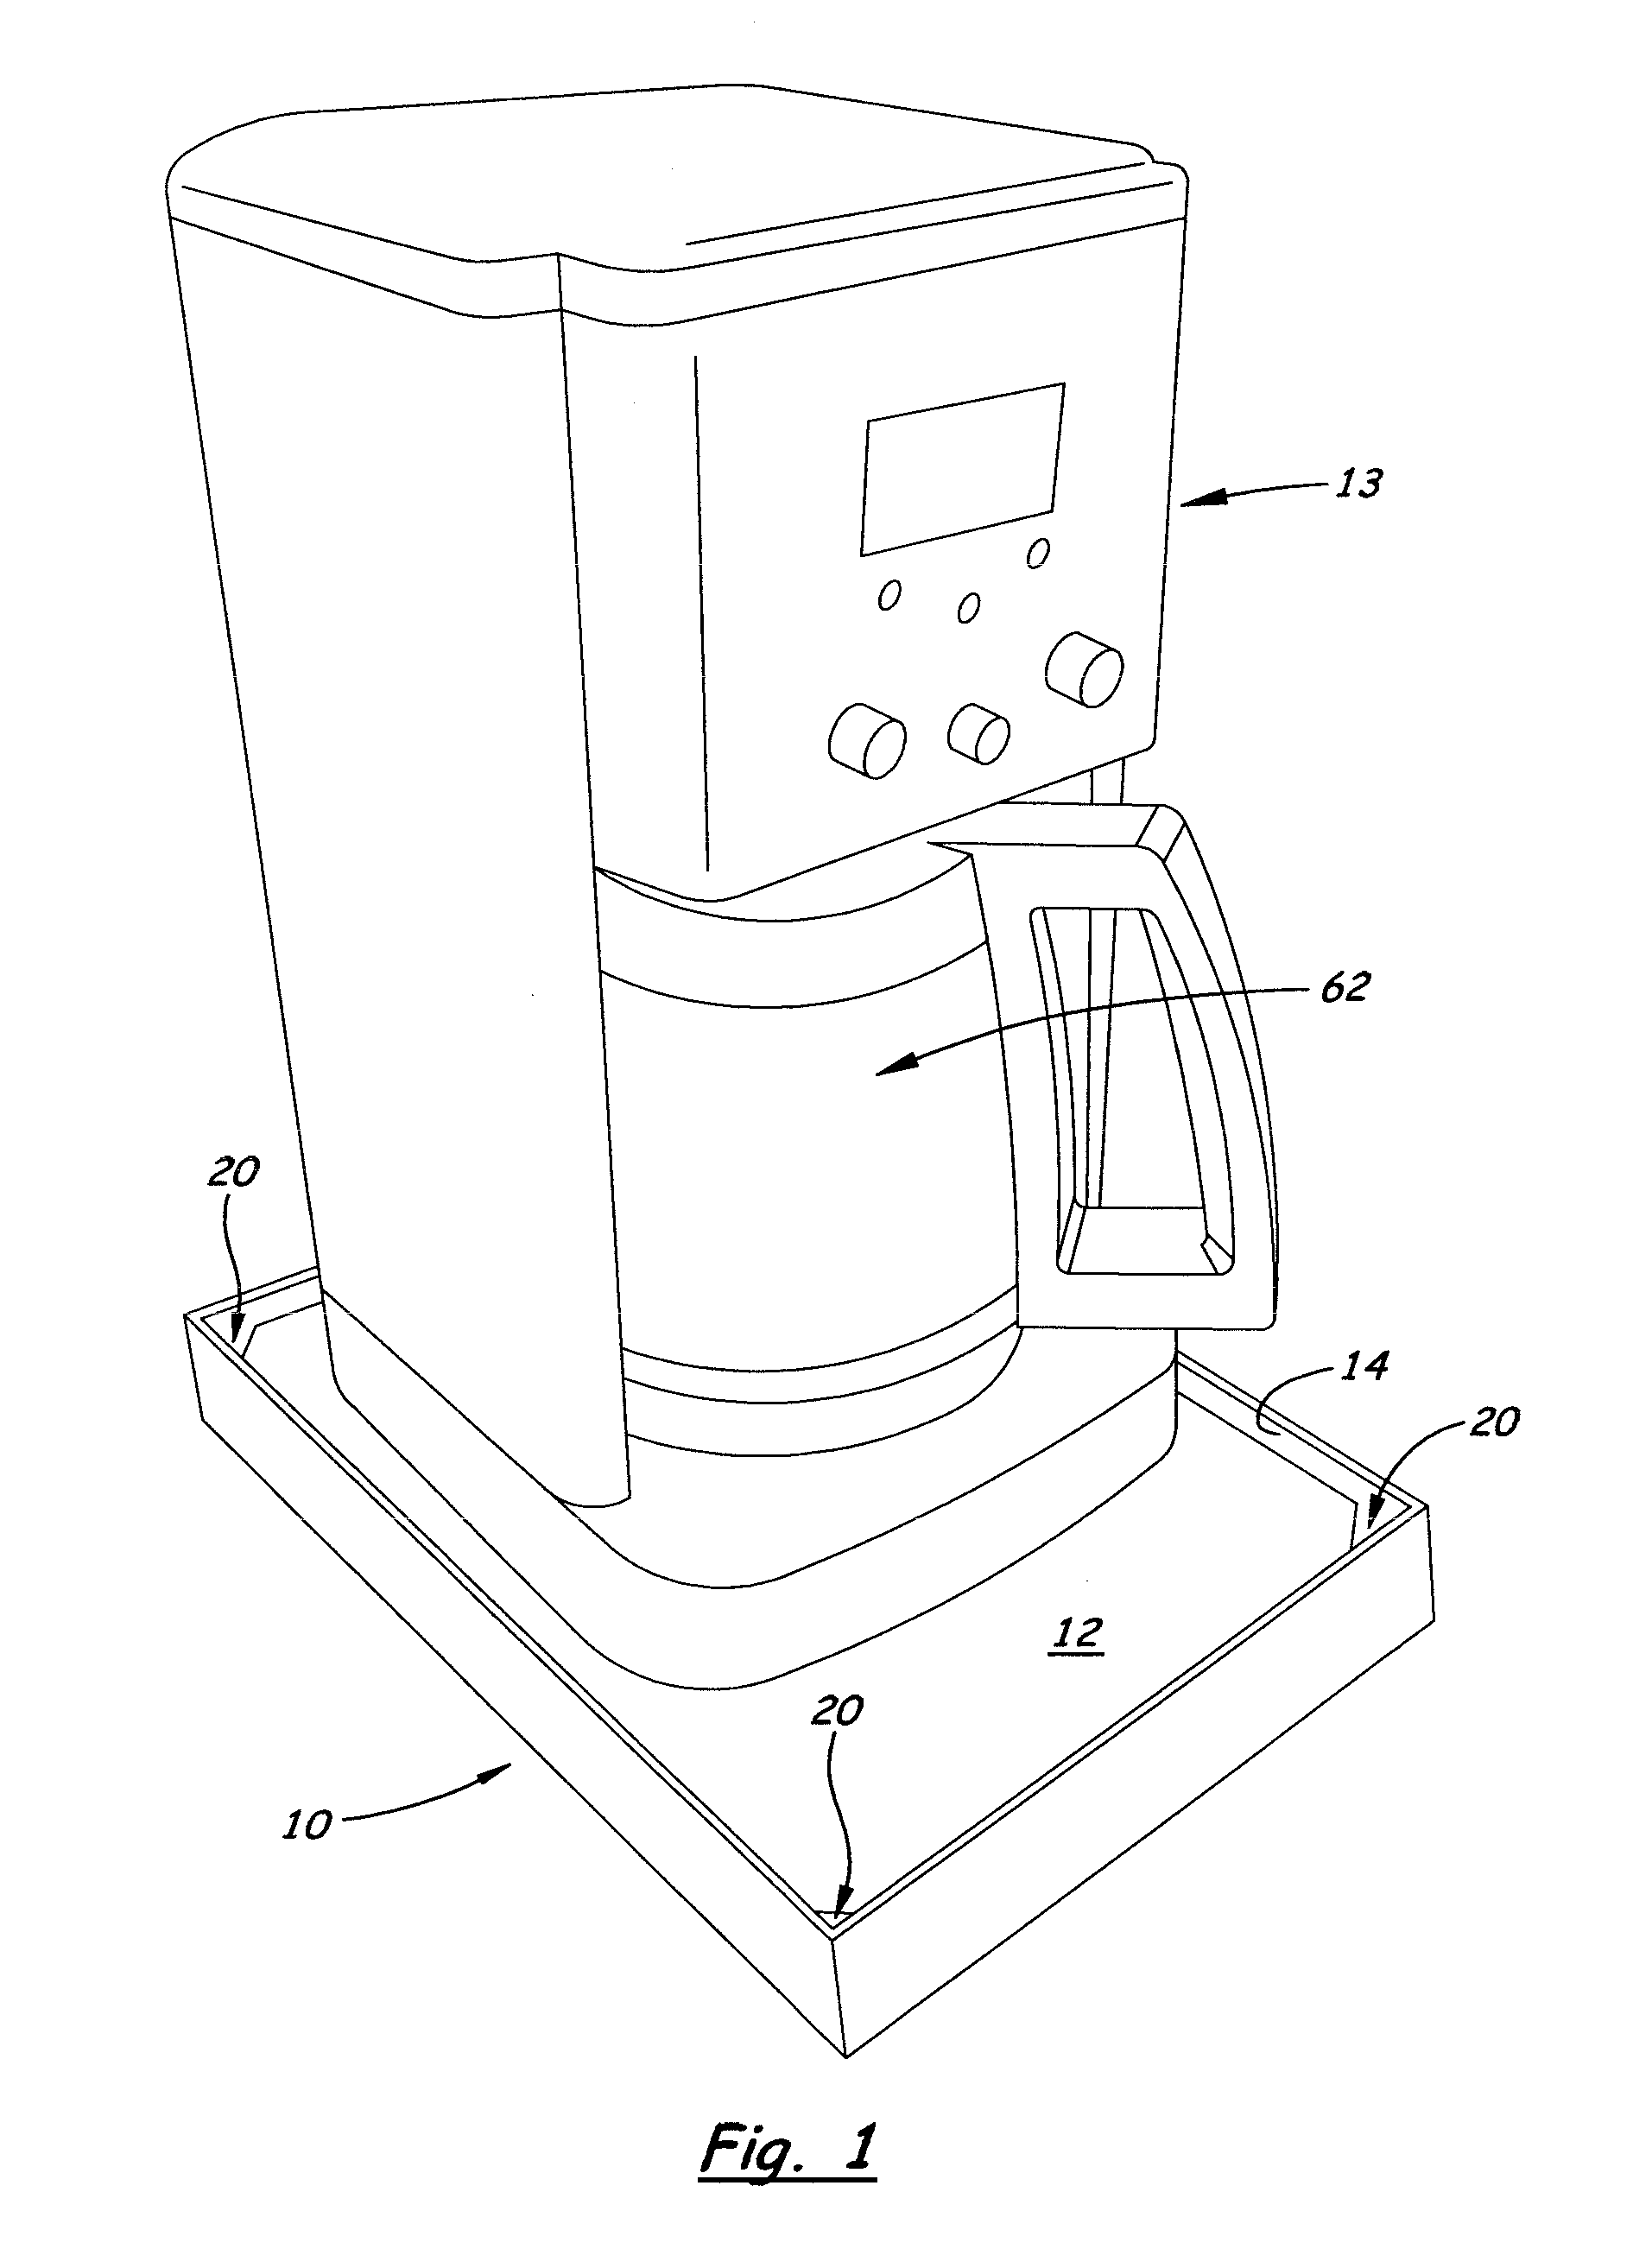 Liquid overflow platform and container for small appliances